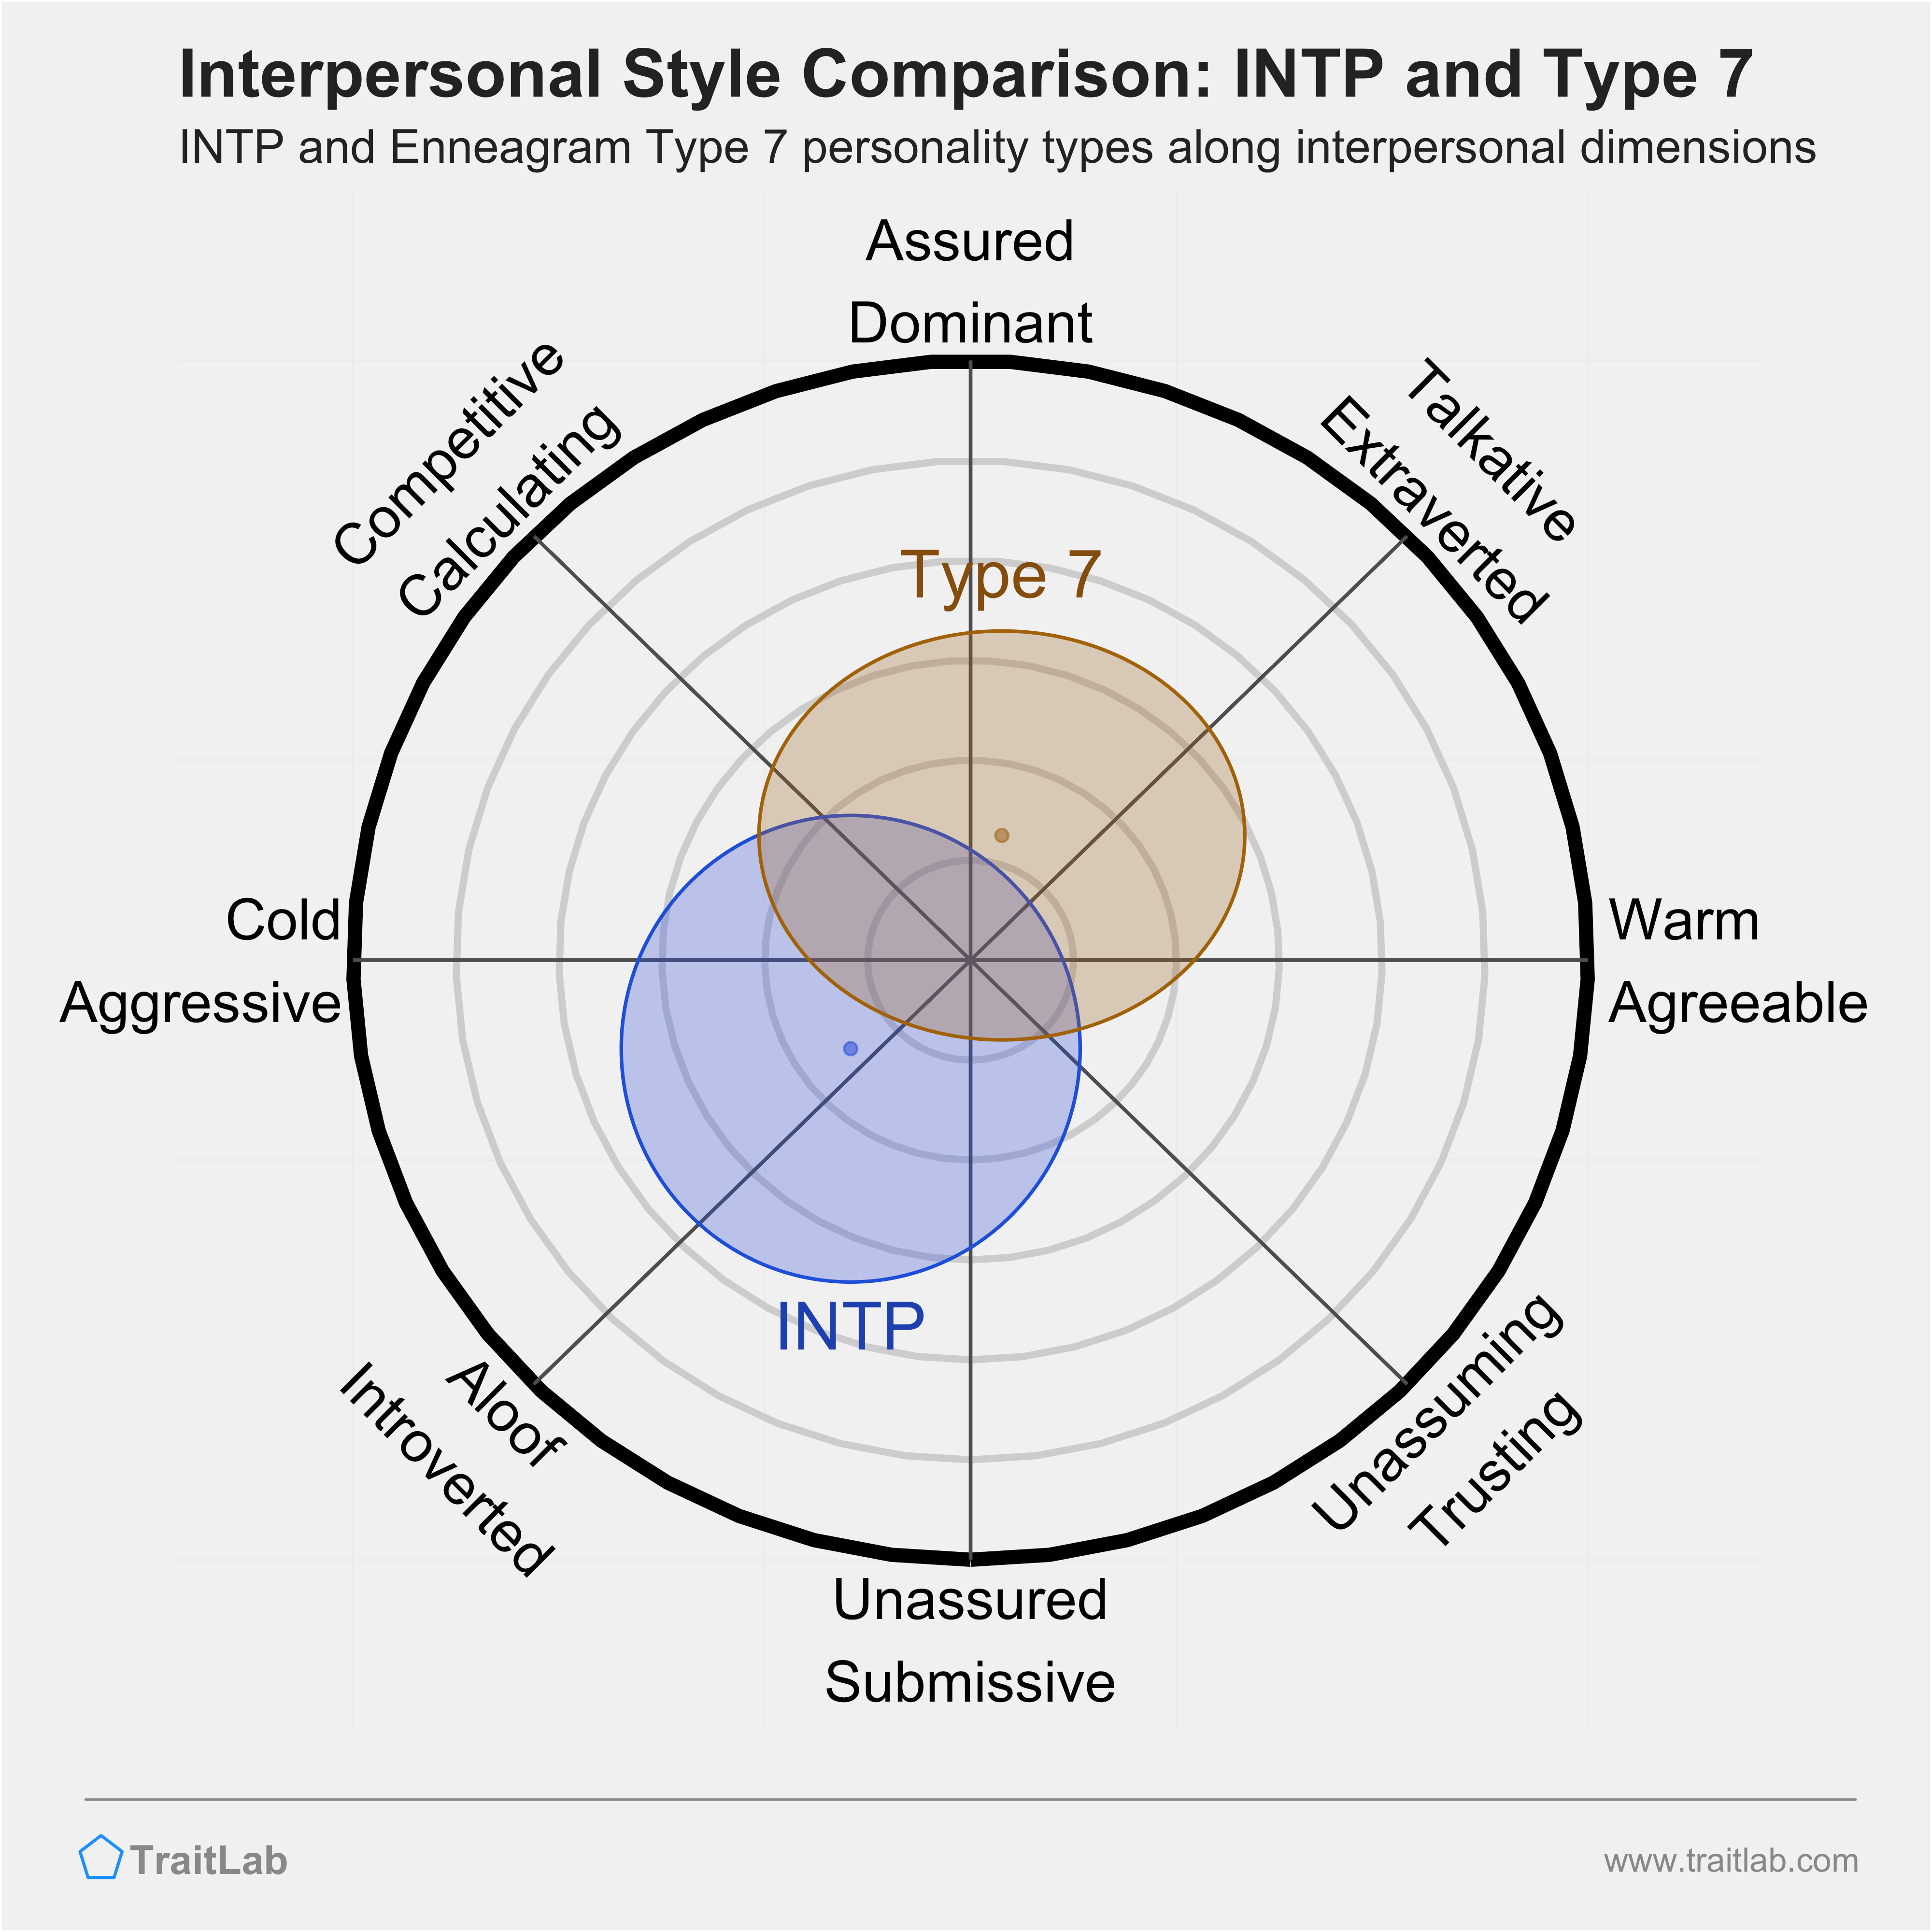 Enneagram INTP and Type 7 comparison across interpersonal dimensions